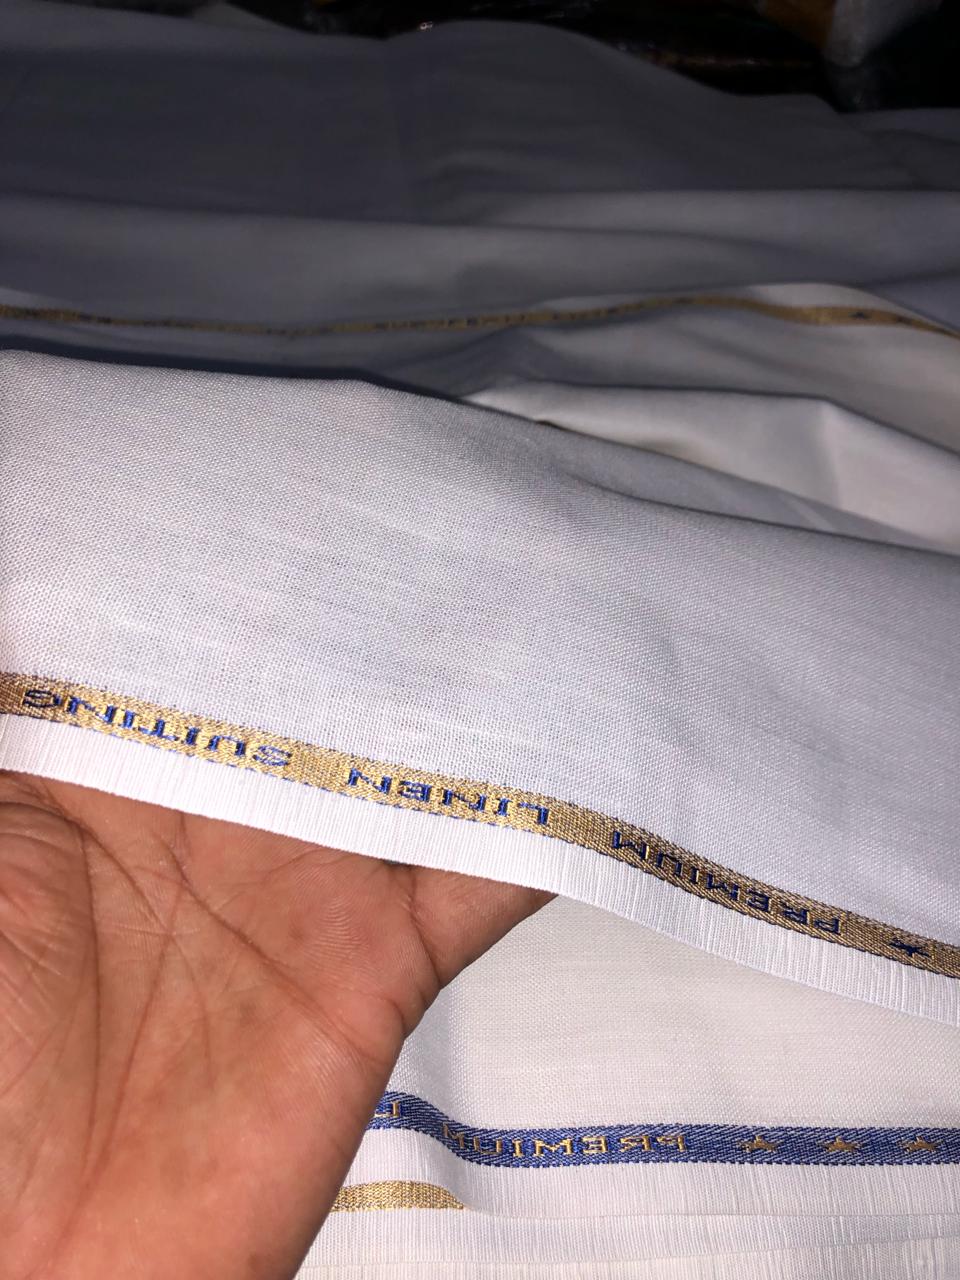 Hemp 55% Cotton 45% Suiting fabric 58 inches wide  beige and natural white is premium linen suiting